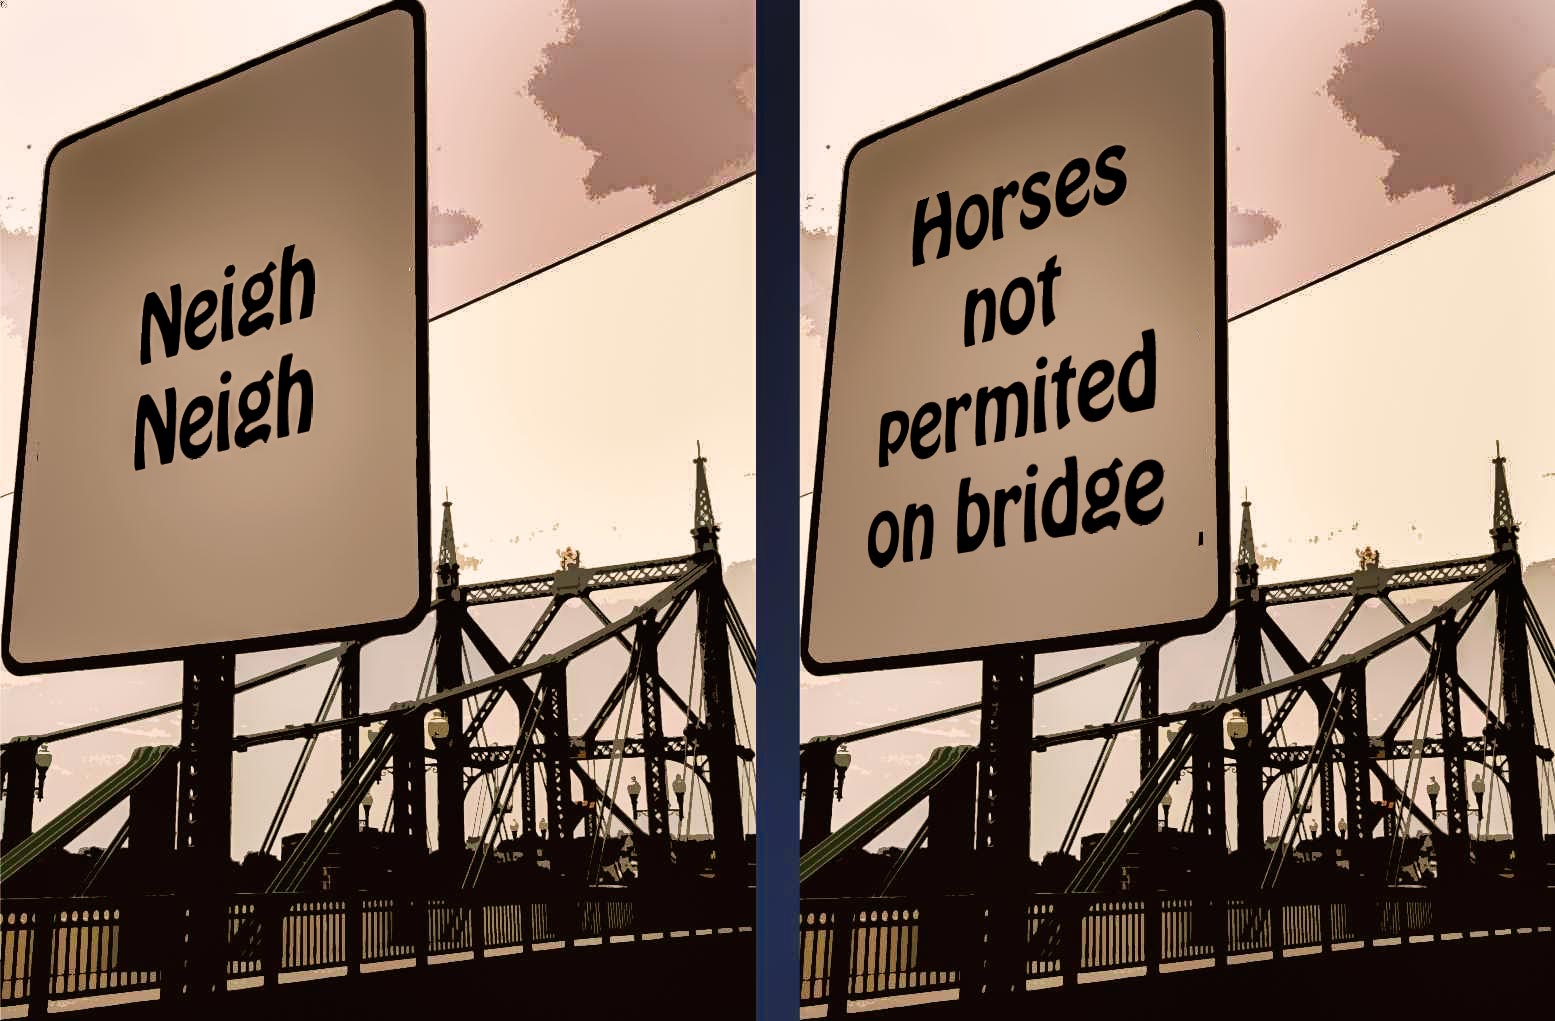 horses not allowed